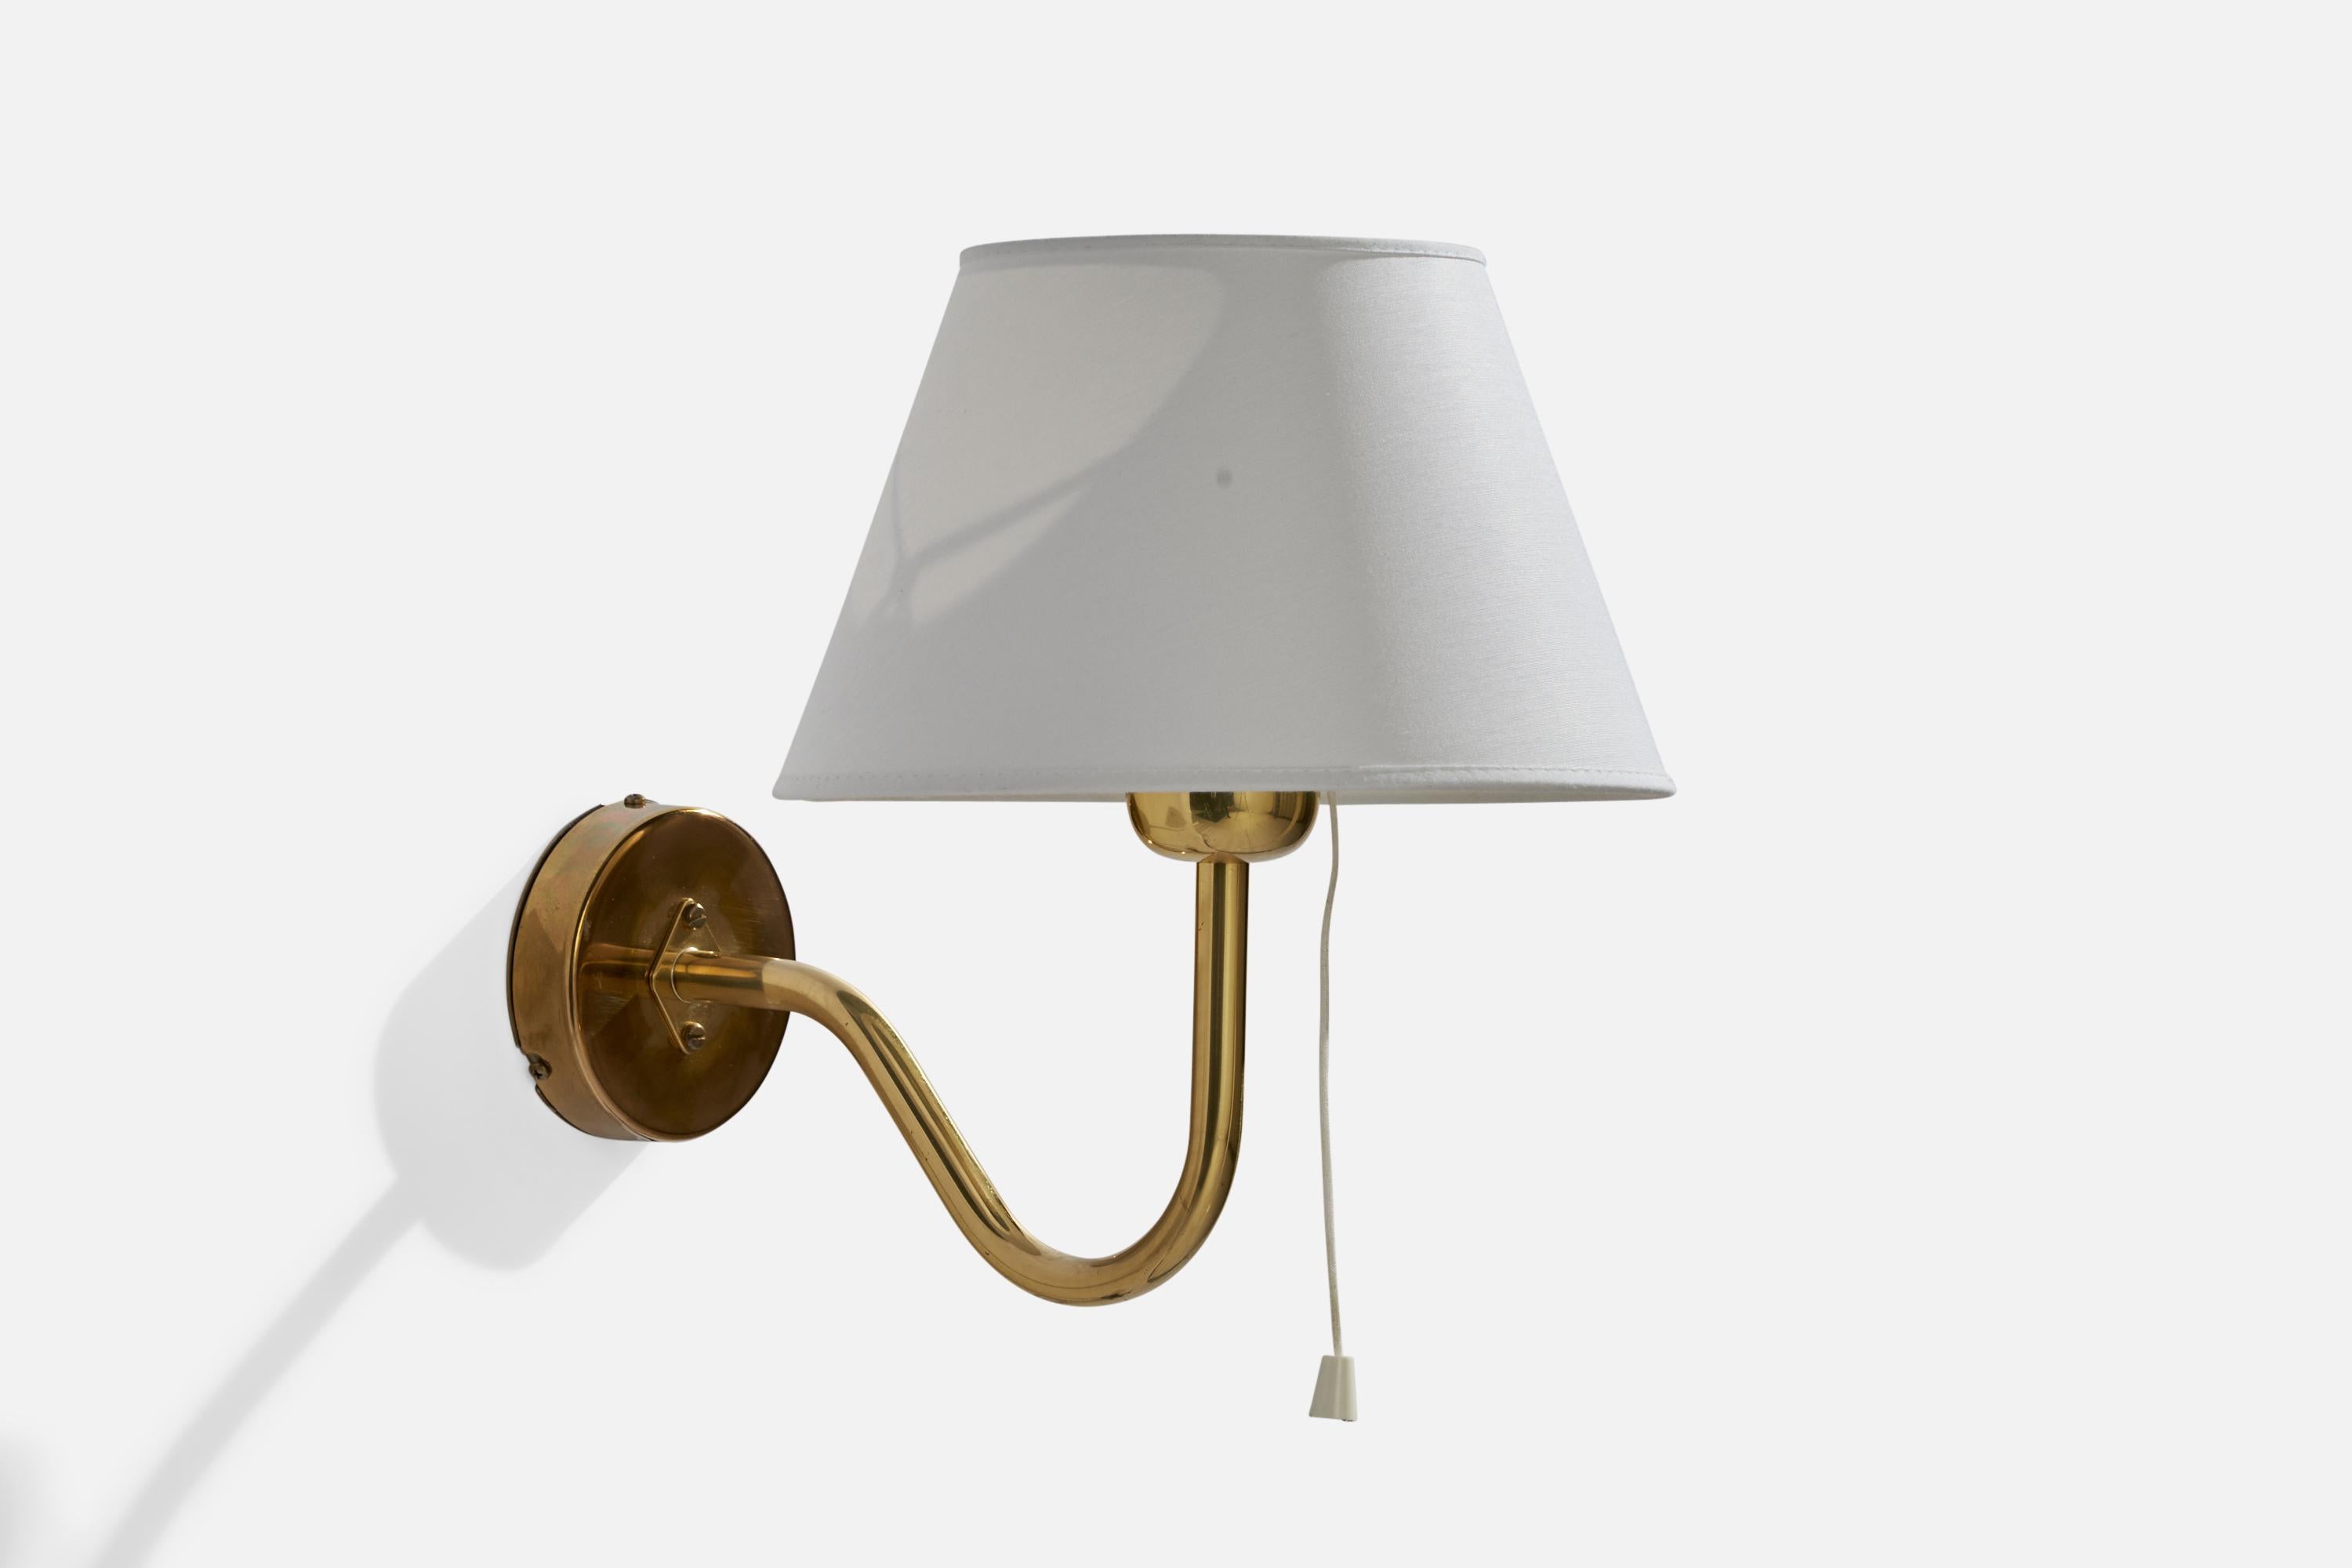 A brass and white fabric wall lights designed and produced by Nya Öia, Sweden, 1970s.

Overall Dimensions (inches): 10”  H x 8”  W x 11” D
Back Plate Dimensions (inches): 3.25” H x 3.25” W x .75” D
Bulb Specifications: E-26 Bulb
Number of Sockets: